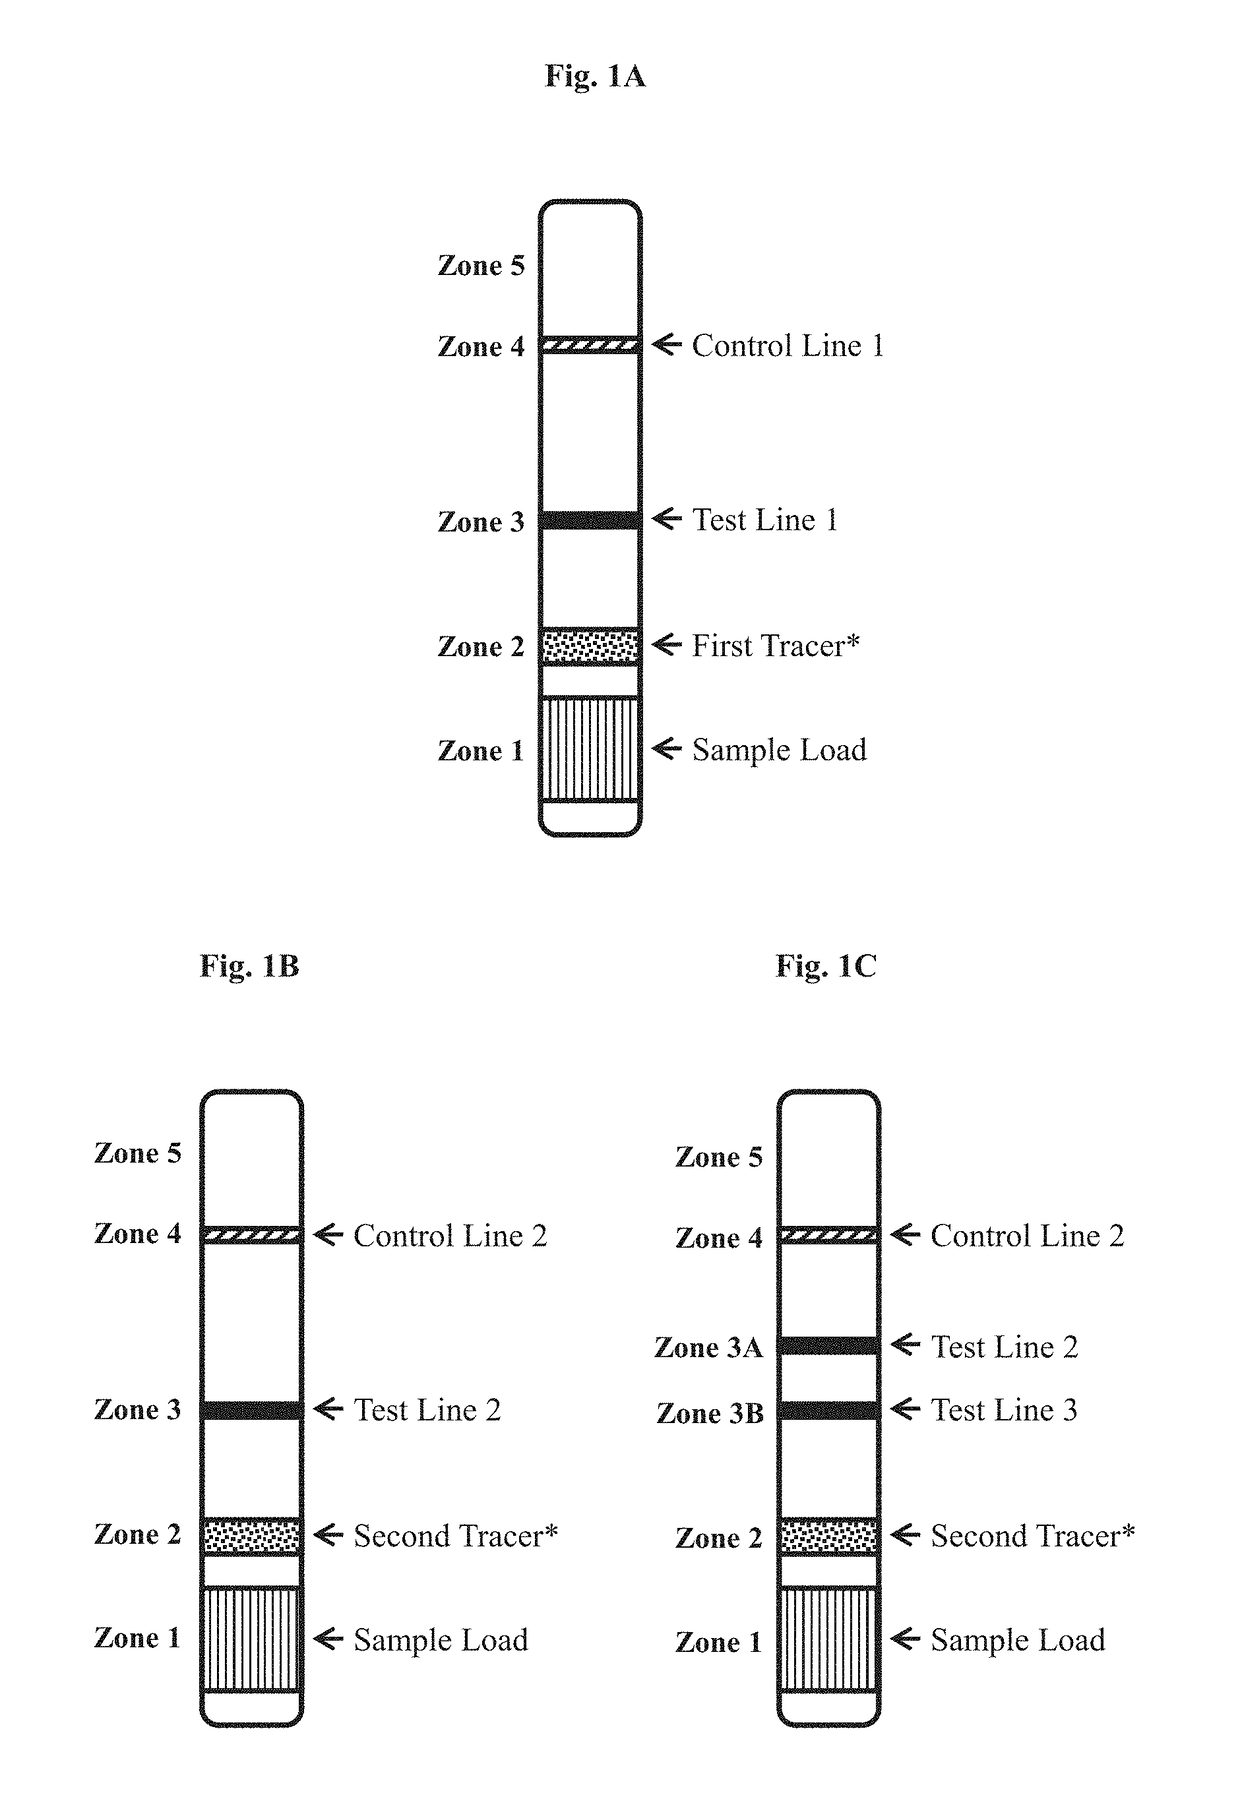 Rapid immunochromatographic lateral flow assay for early zika disease detection